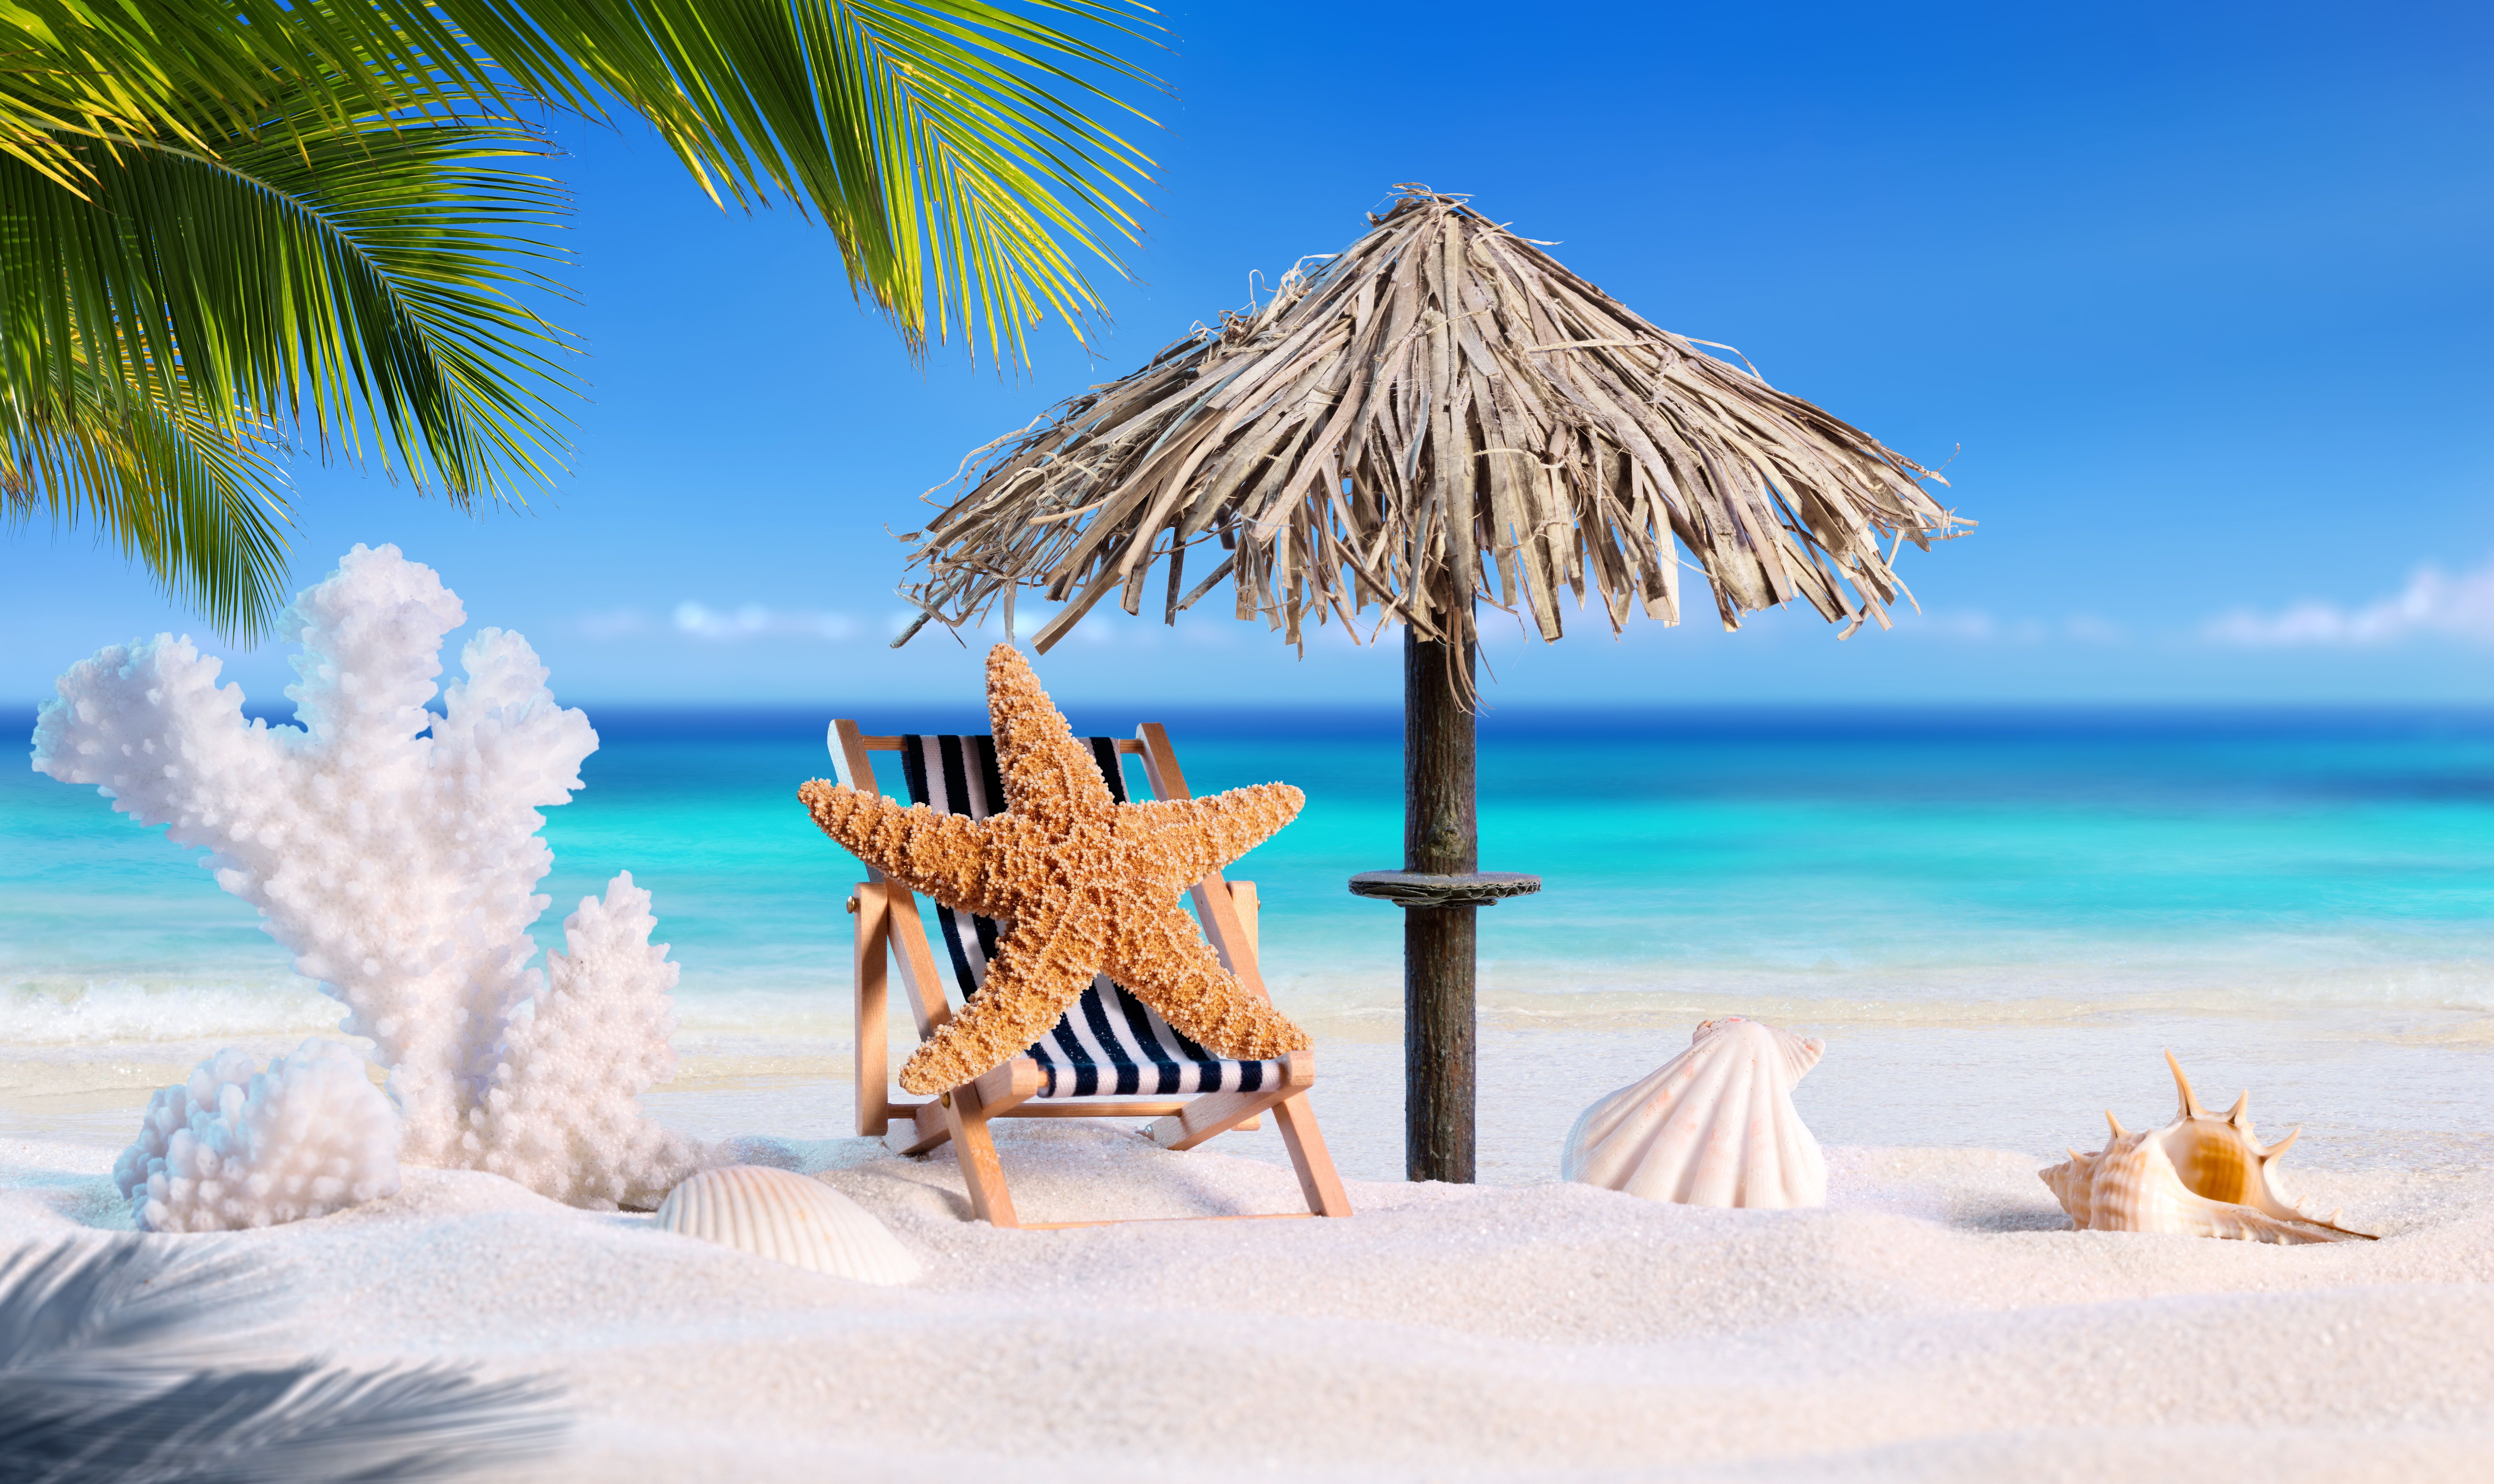 A beach scene with sand, palm trees and an umbrella - Starfish